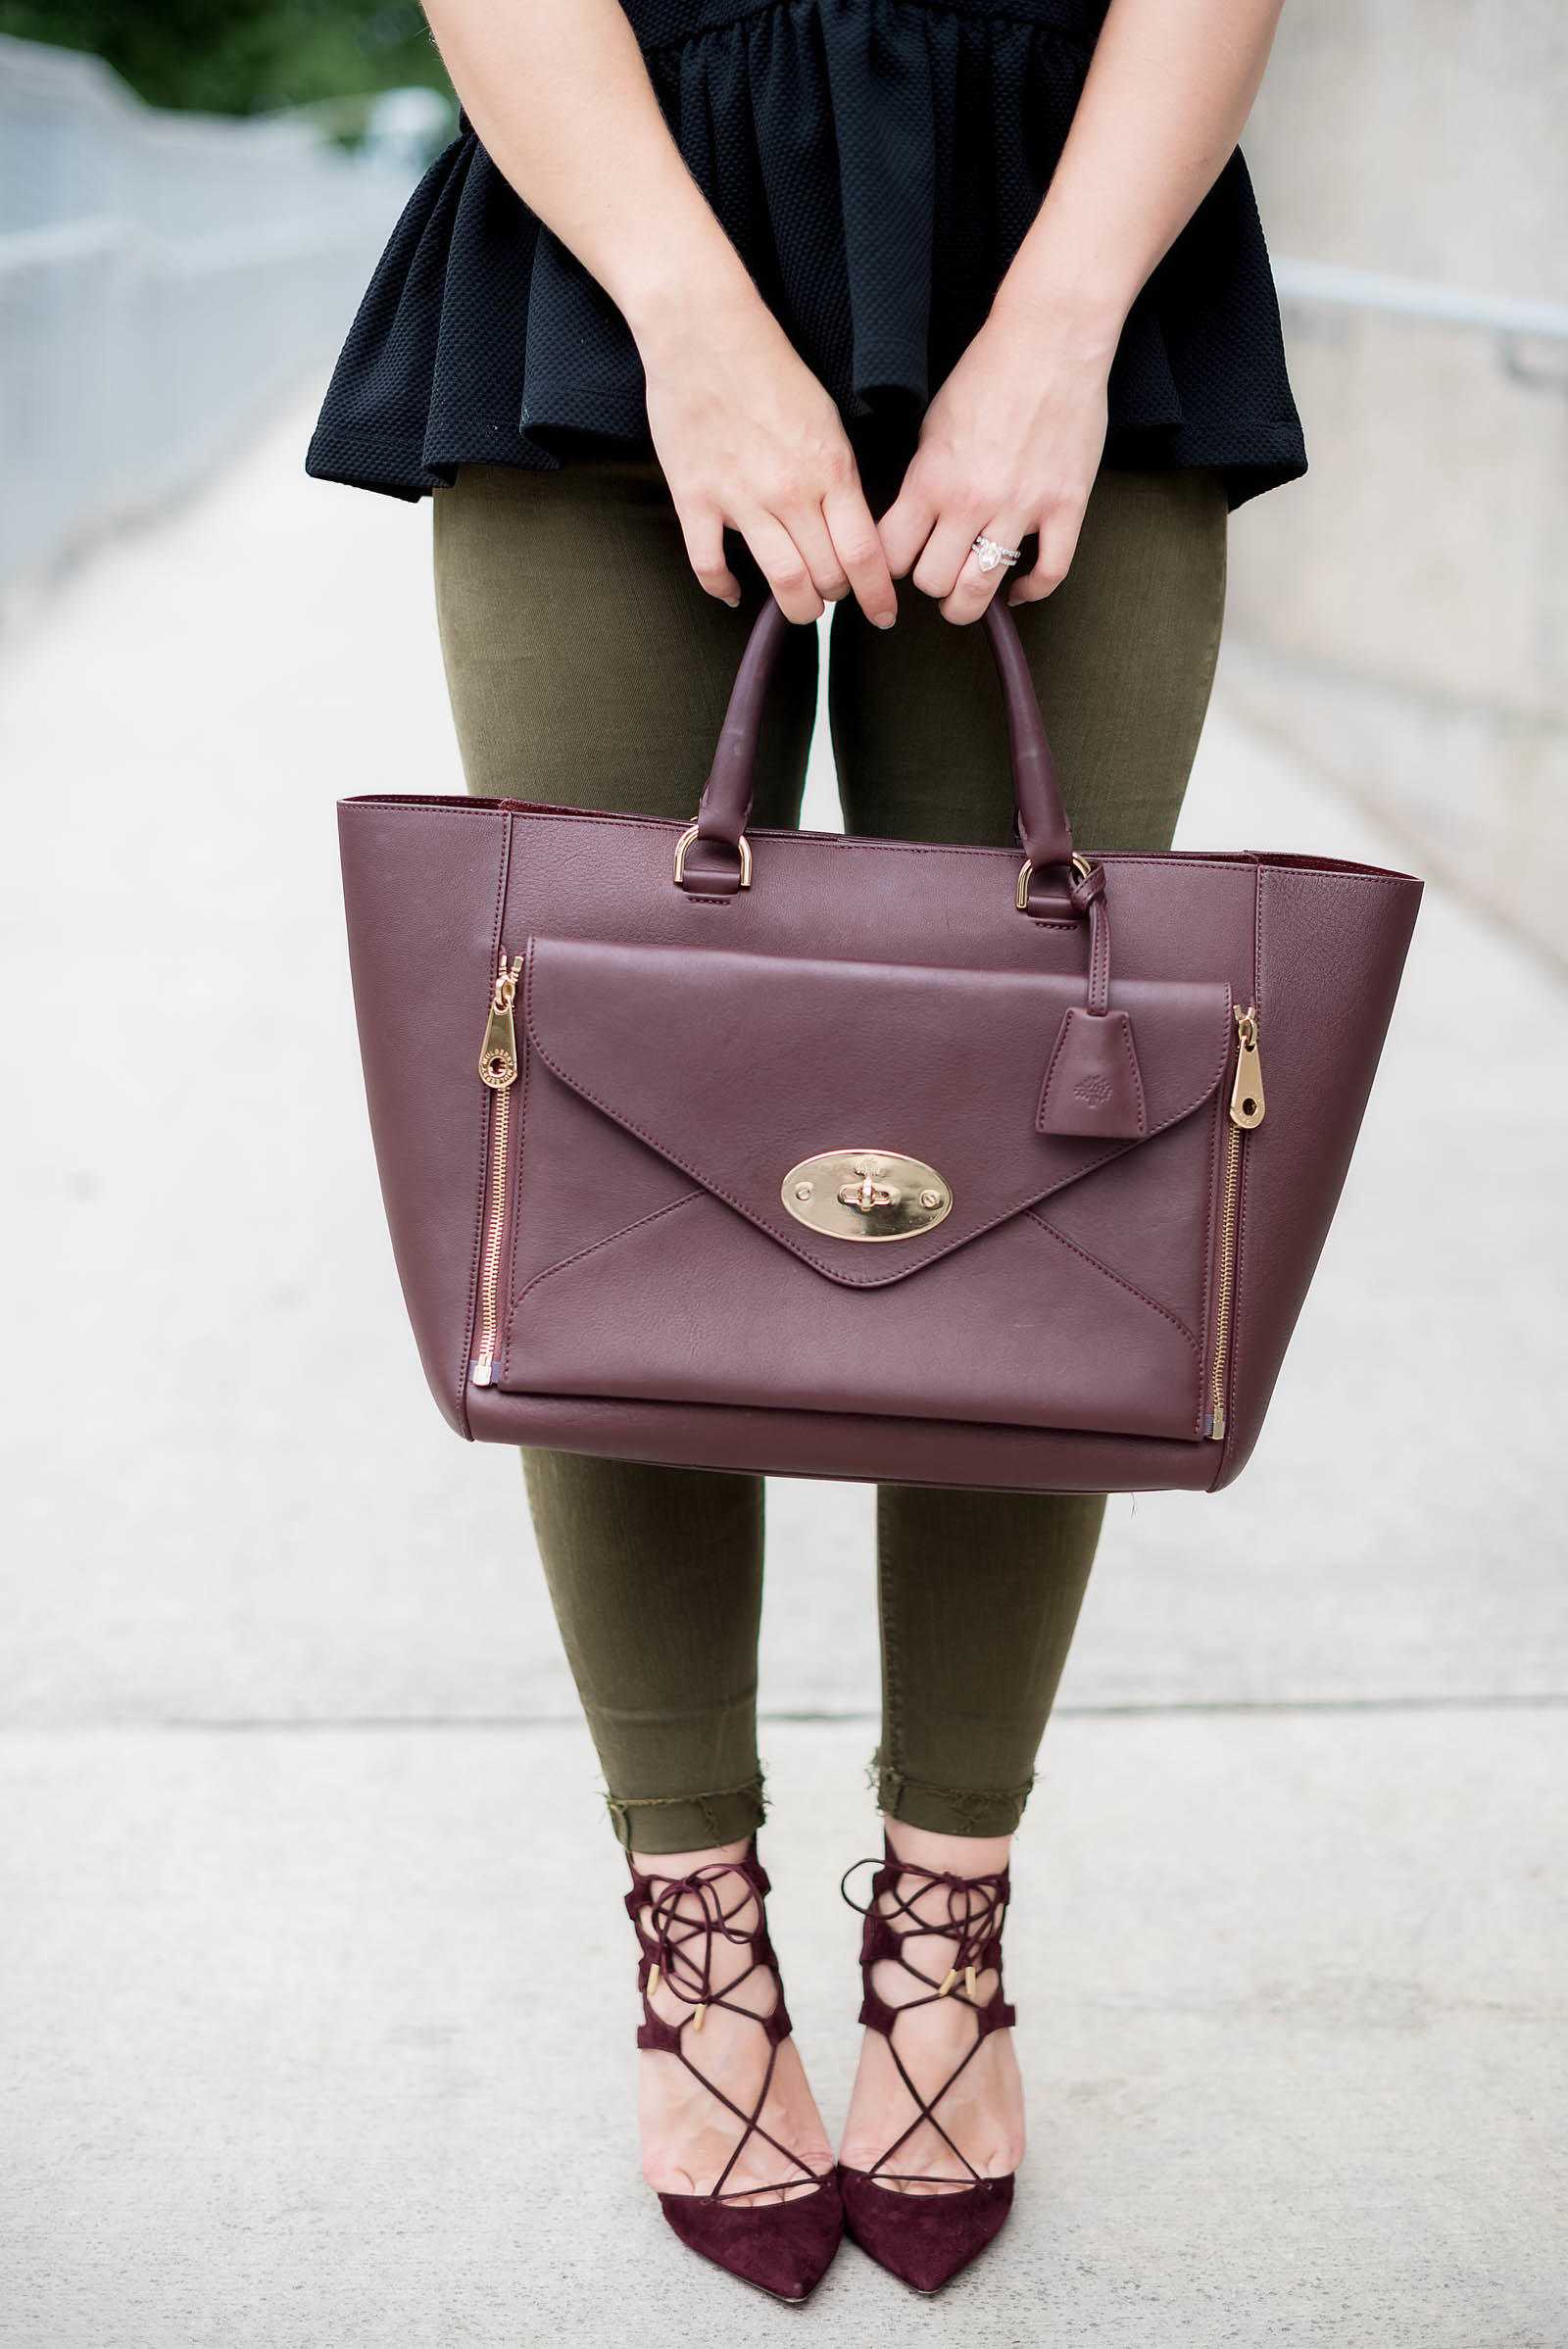 Green Burgundy Fall Outfit